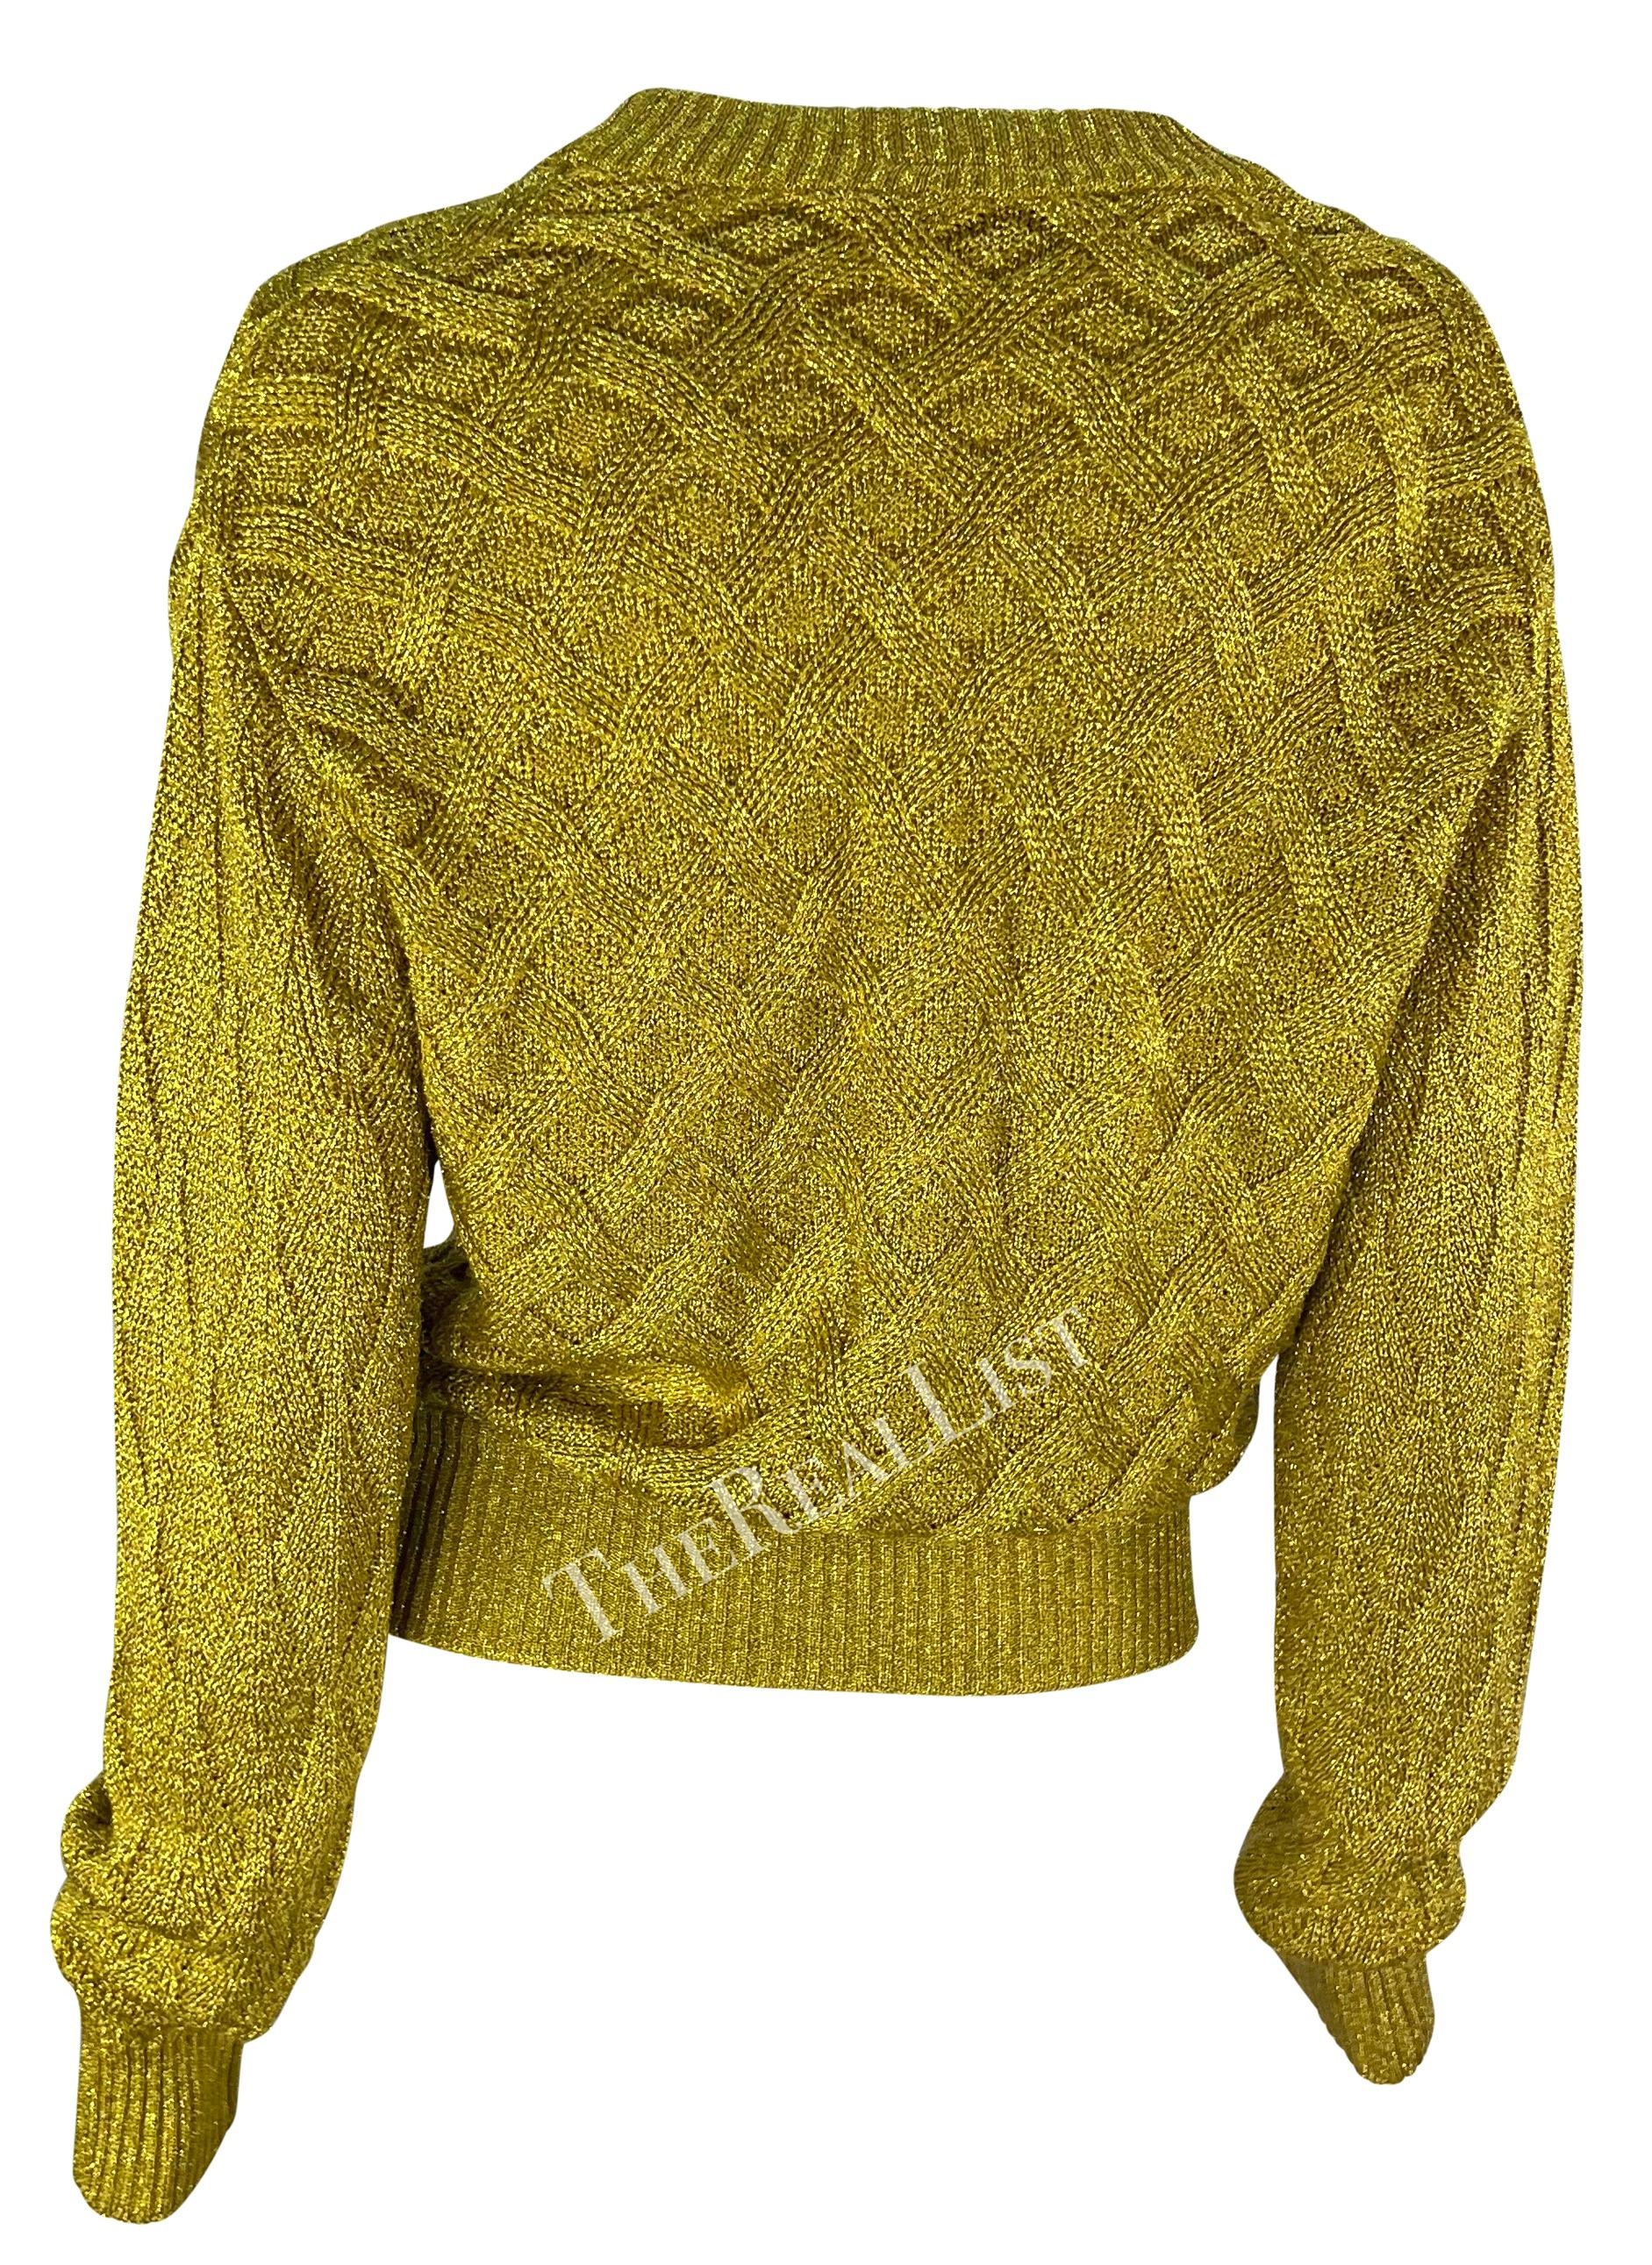 Women's F/W 1992 Atelier Versace Gold Metallic Cable Knit Cardigan Sweater For Sale